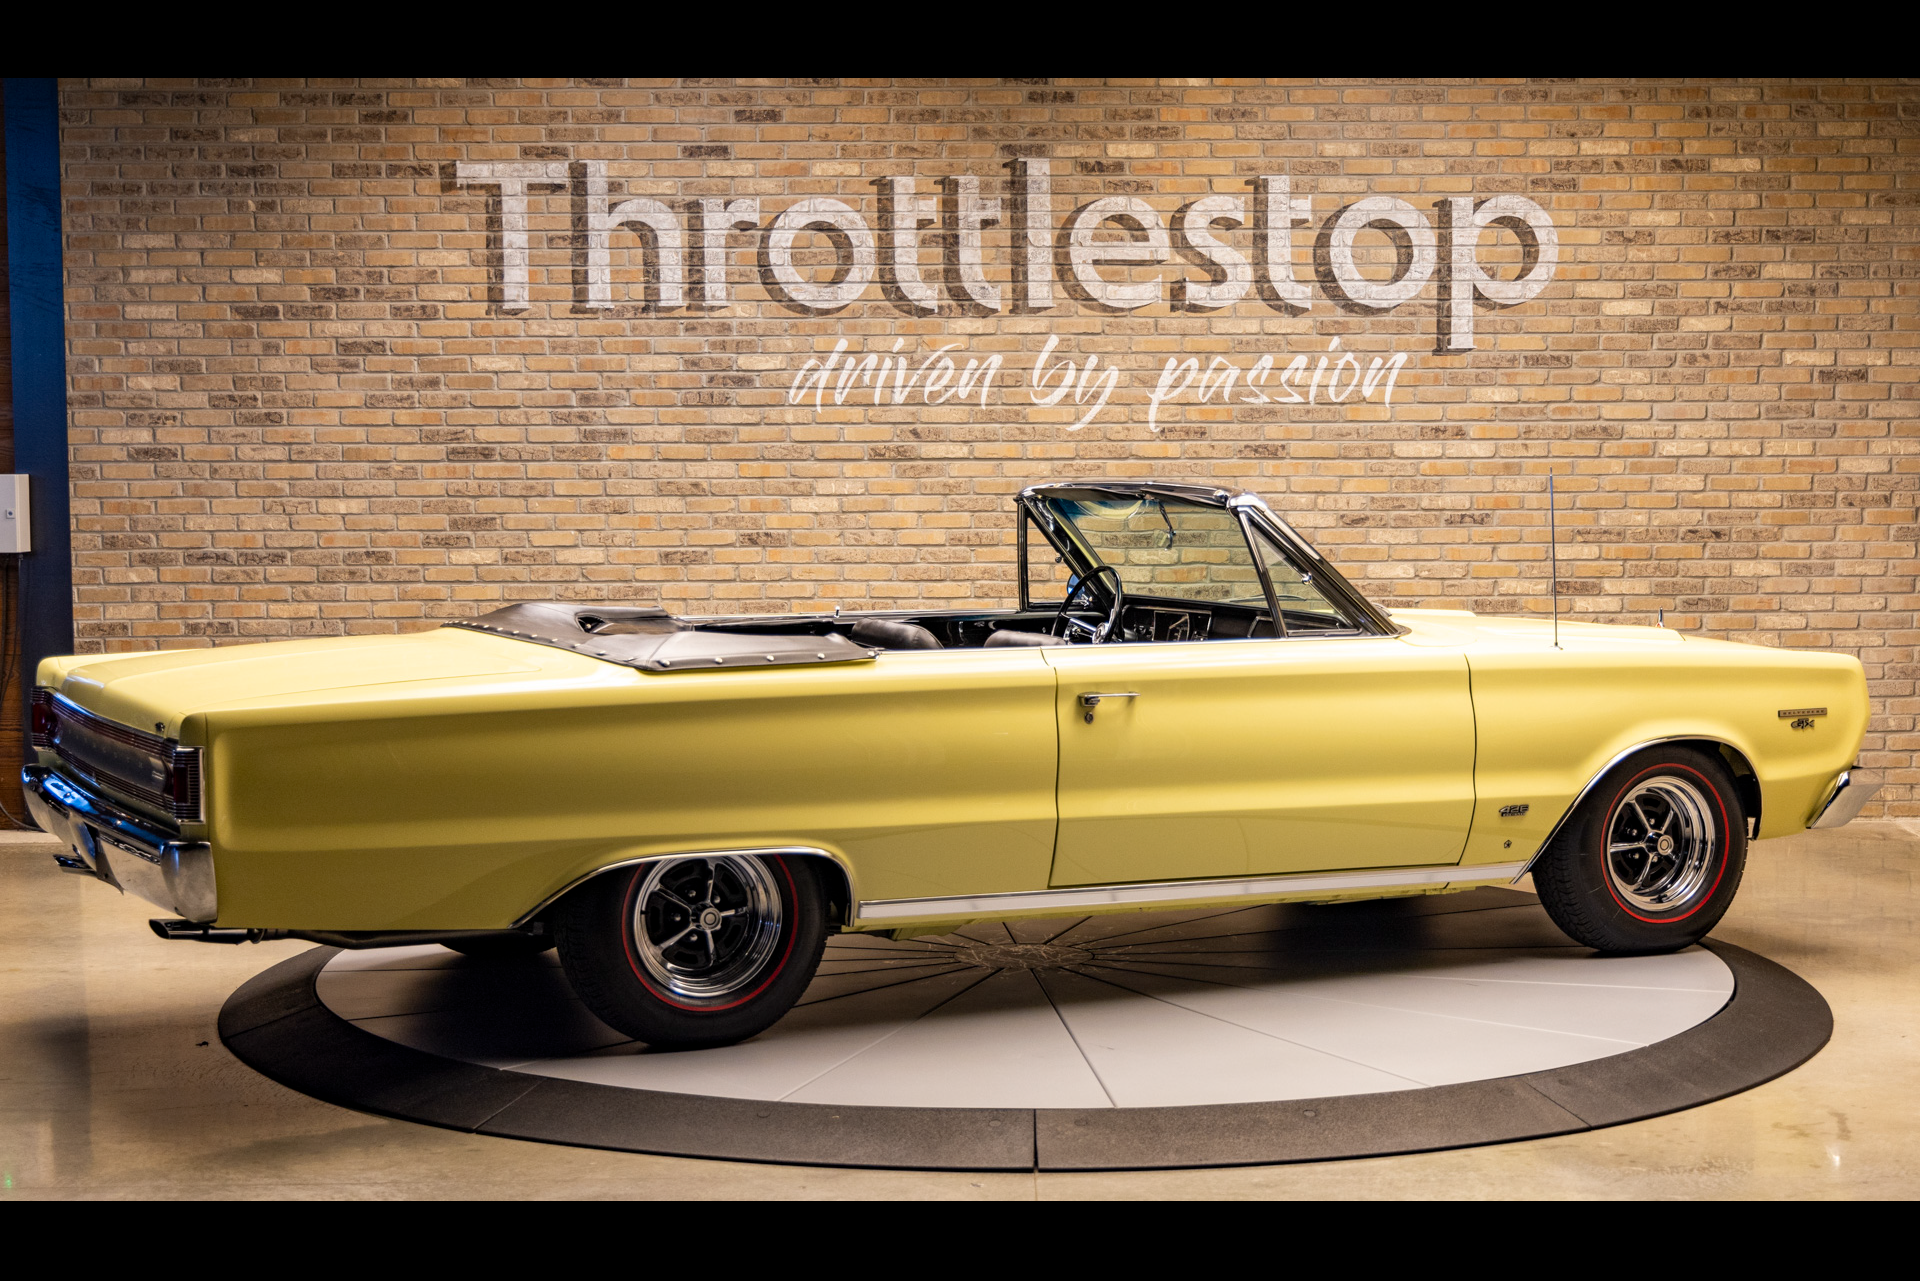 813173 | 1967 Plymouth Belvedere Hemi GTX Convertible | Throttlestop | Automotive and Motorcycle Consignment Dealer